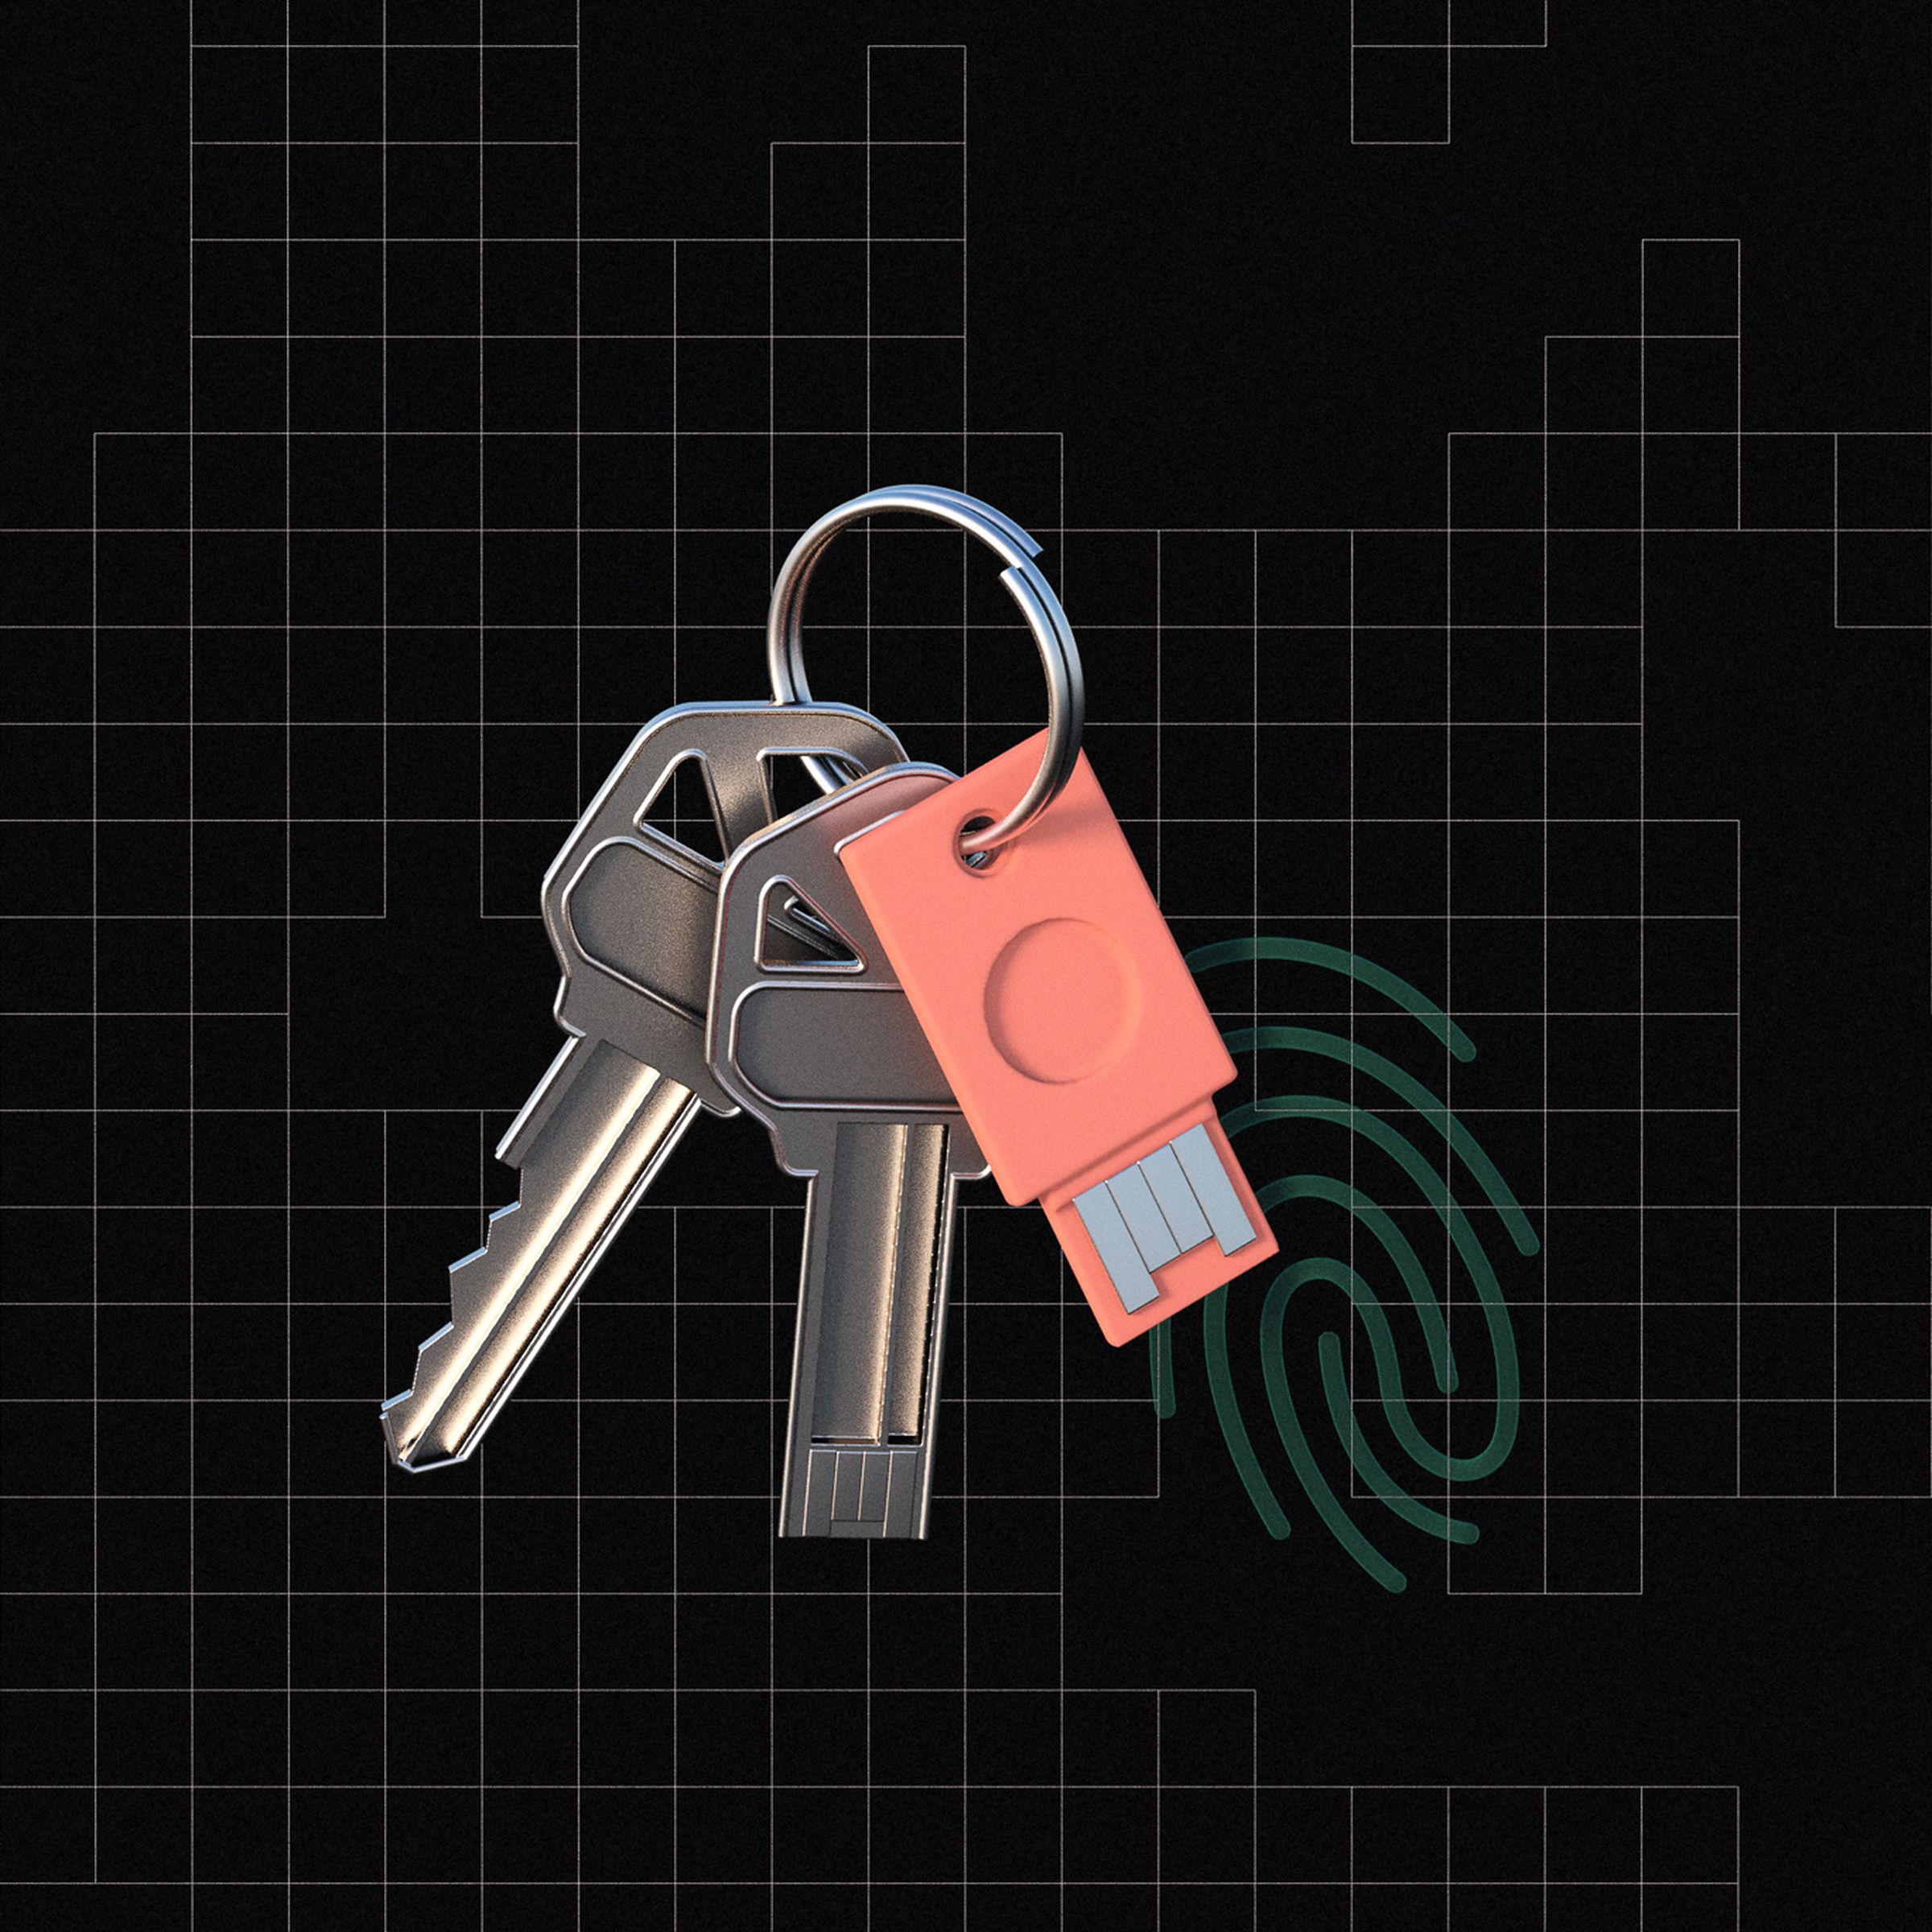 An illustration of a key ring with a regular house hold type key, small flash drive, and a key that has the connector of a flash drive all on the ring. A thumb print is next to the key ring.